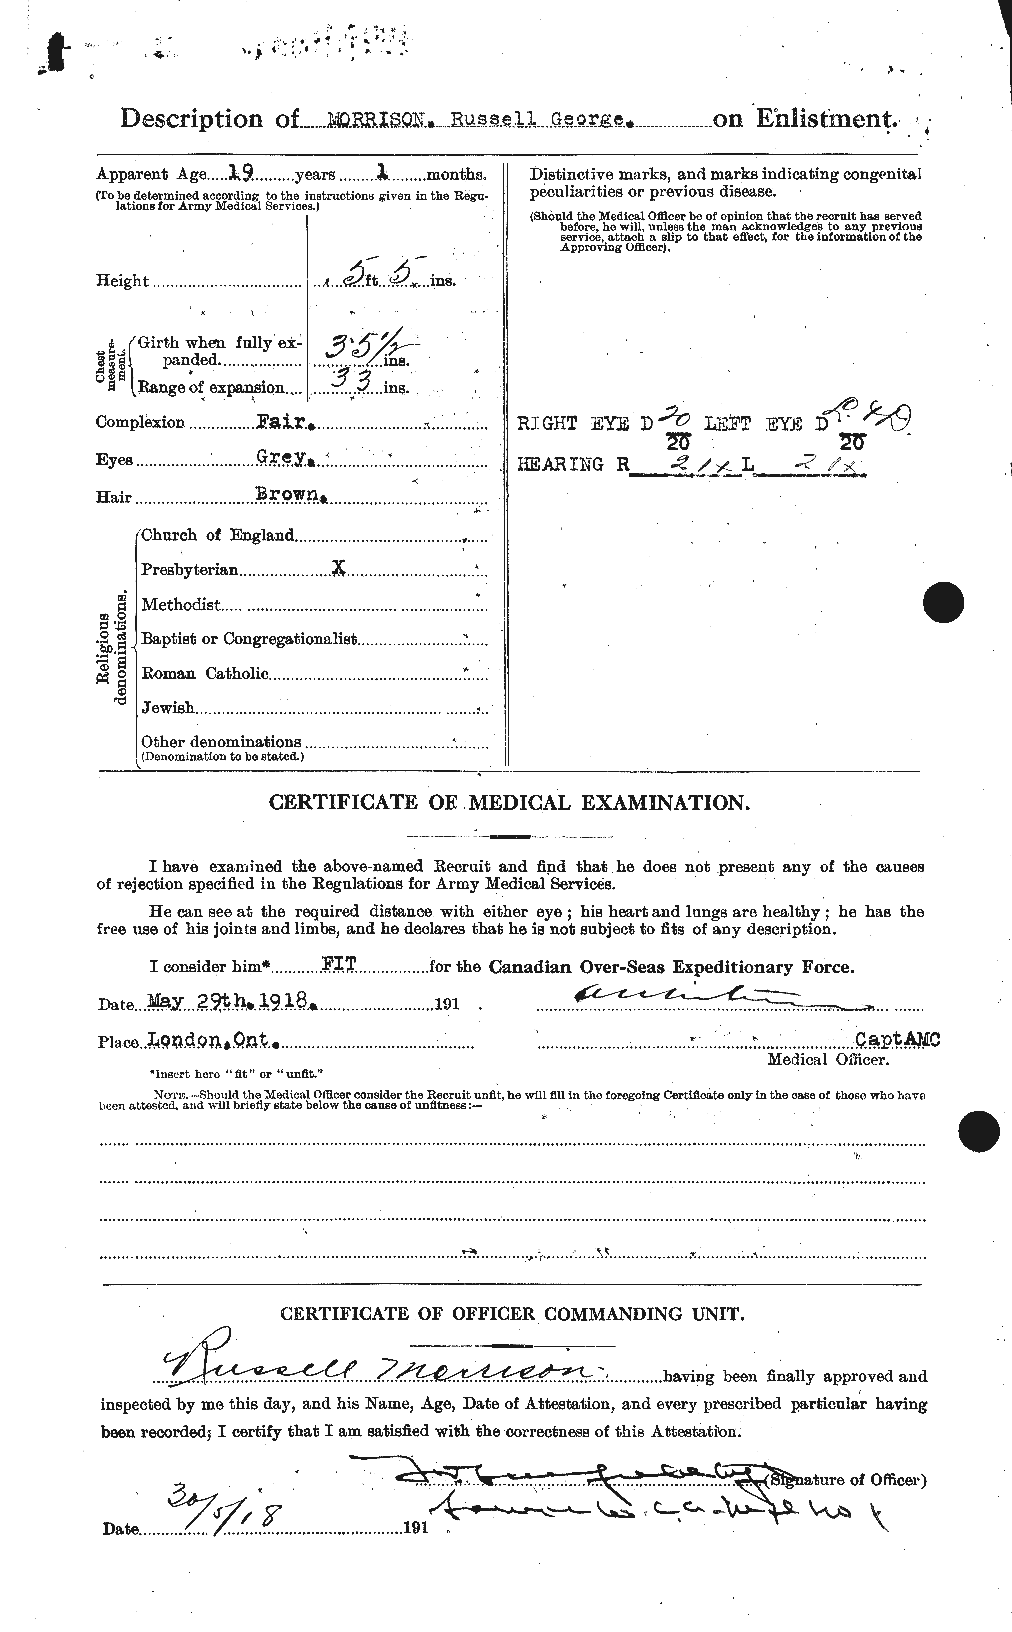 Personnel Records of the First World War - CEF 509137b